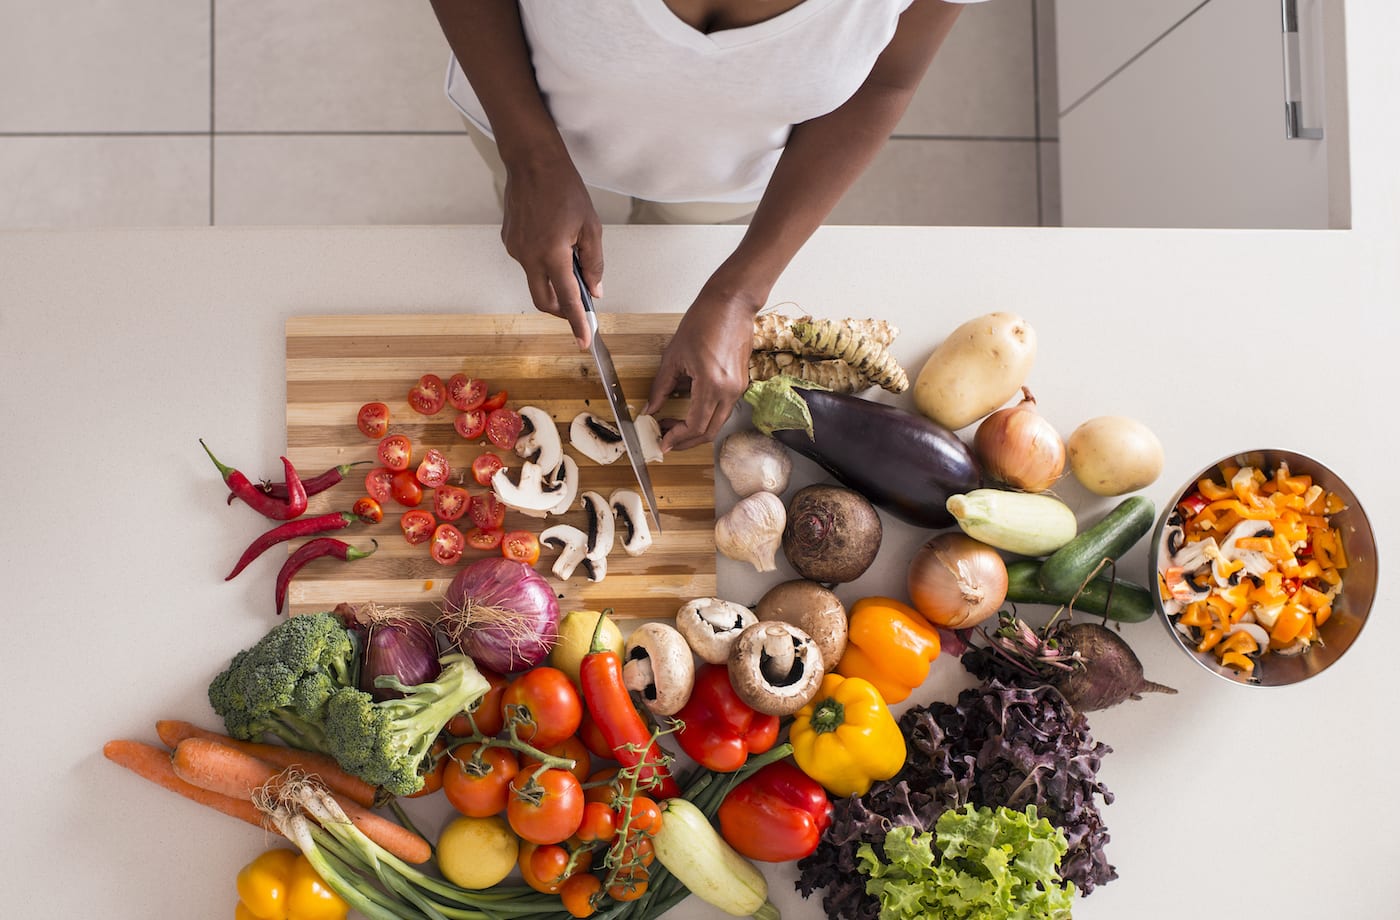 Harvard’s 6-Week Nutrition Course Helps You Learn To Eat Healthier